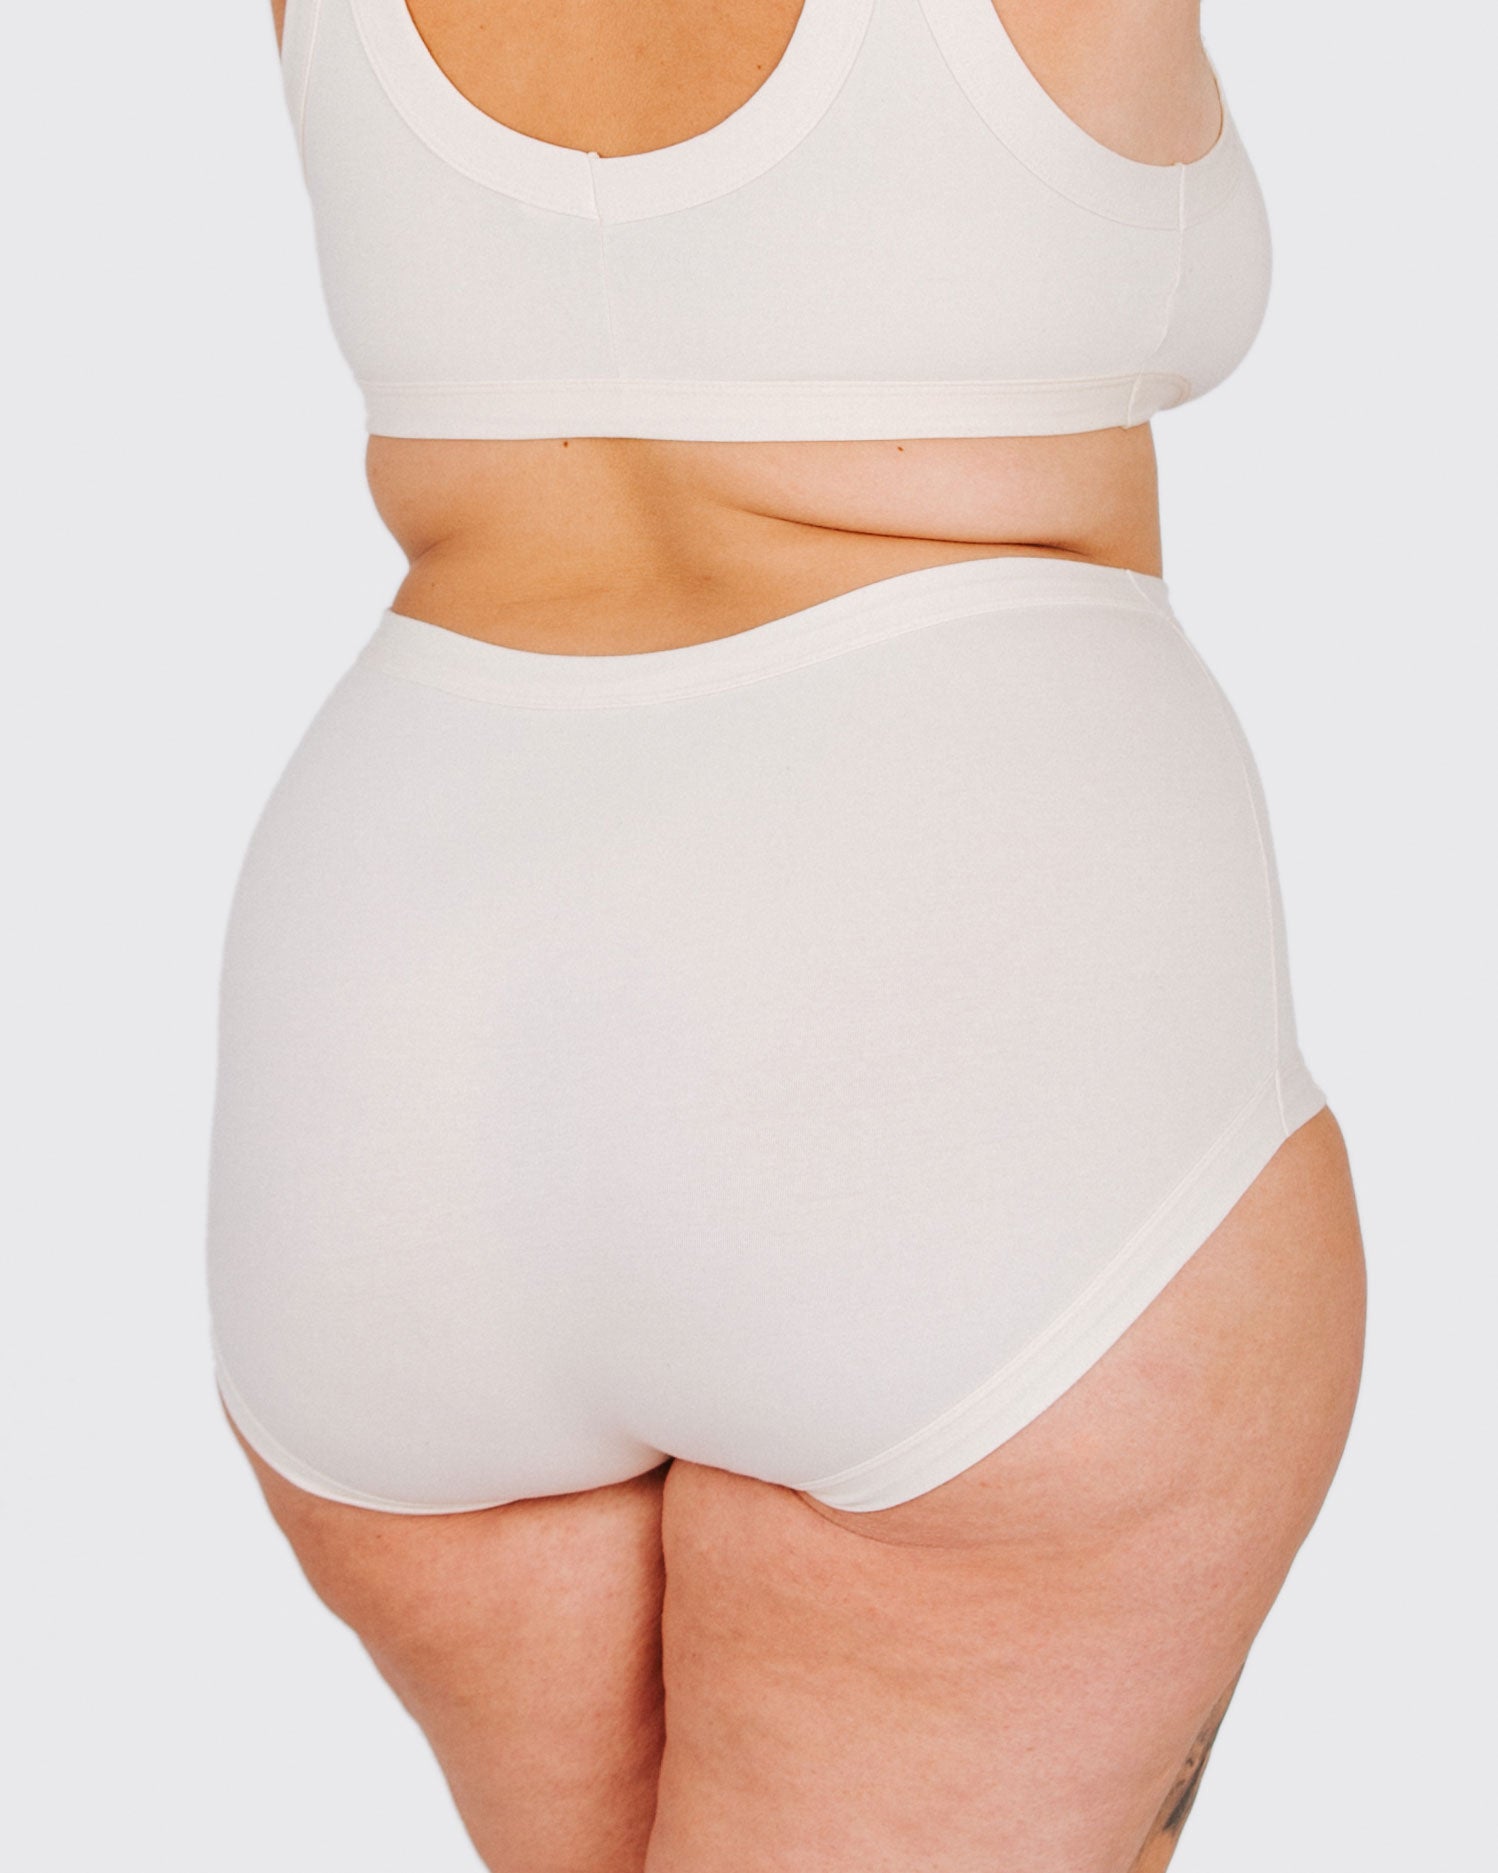 Fit photo from the back of Thunderpants organic cotton Original style underwear in off-white on, showing a wedgie-free bum, on a model.